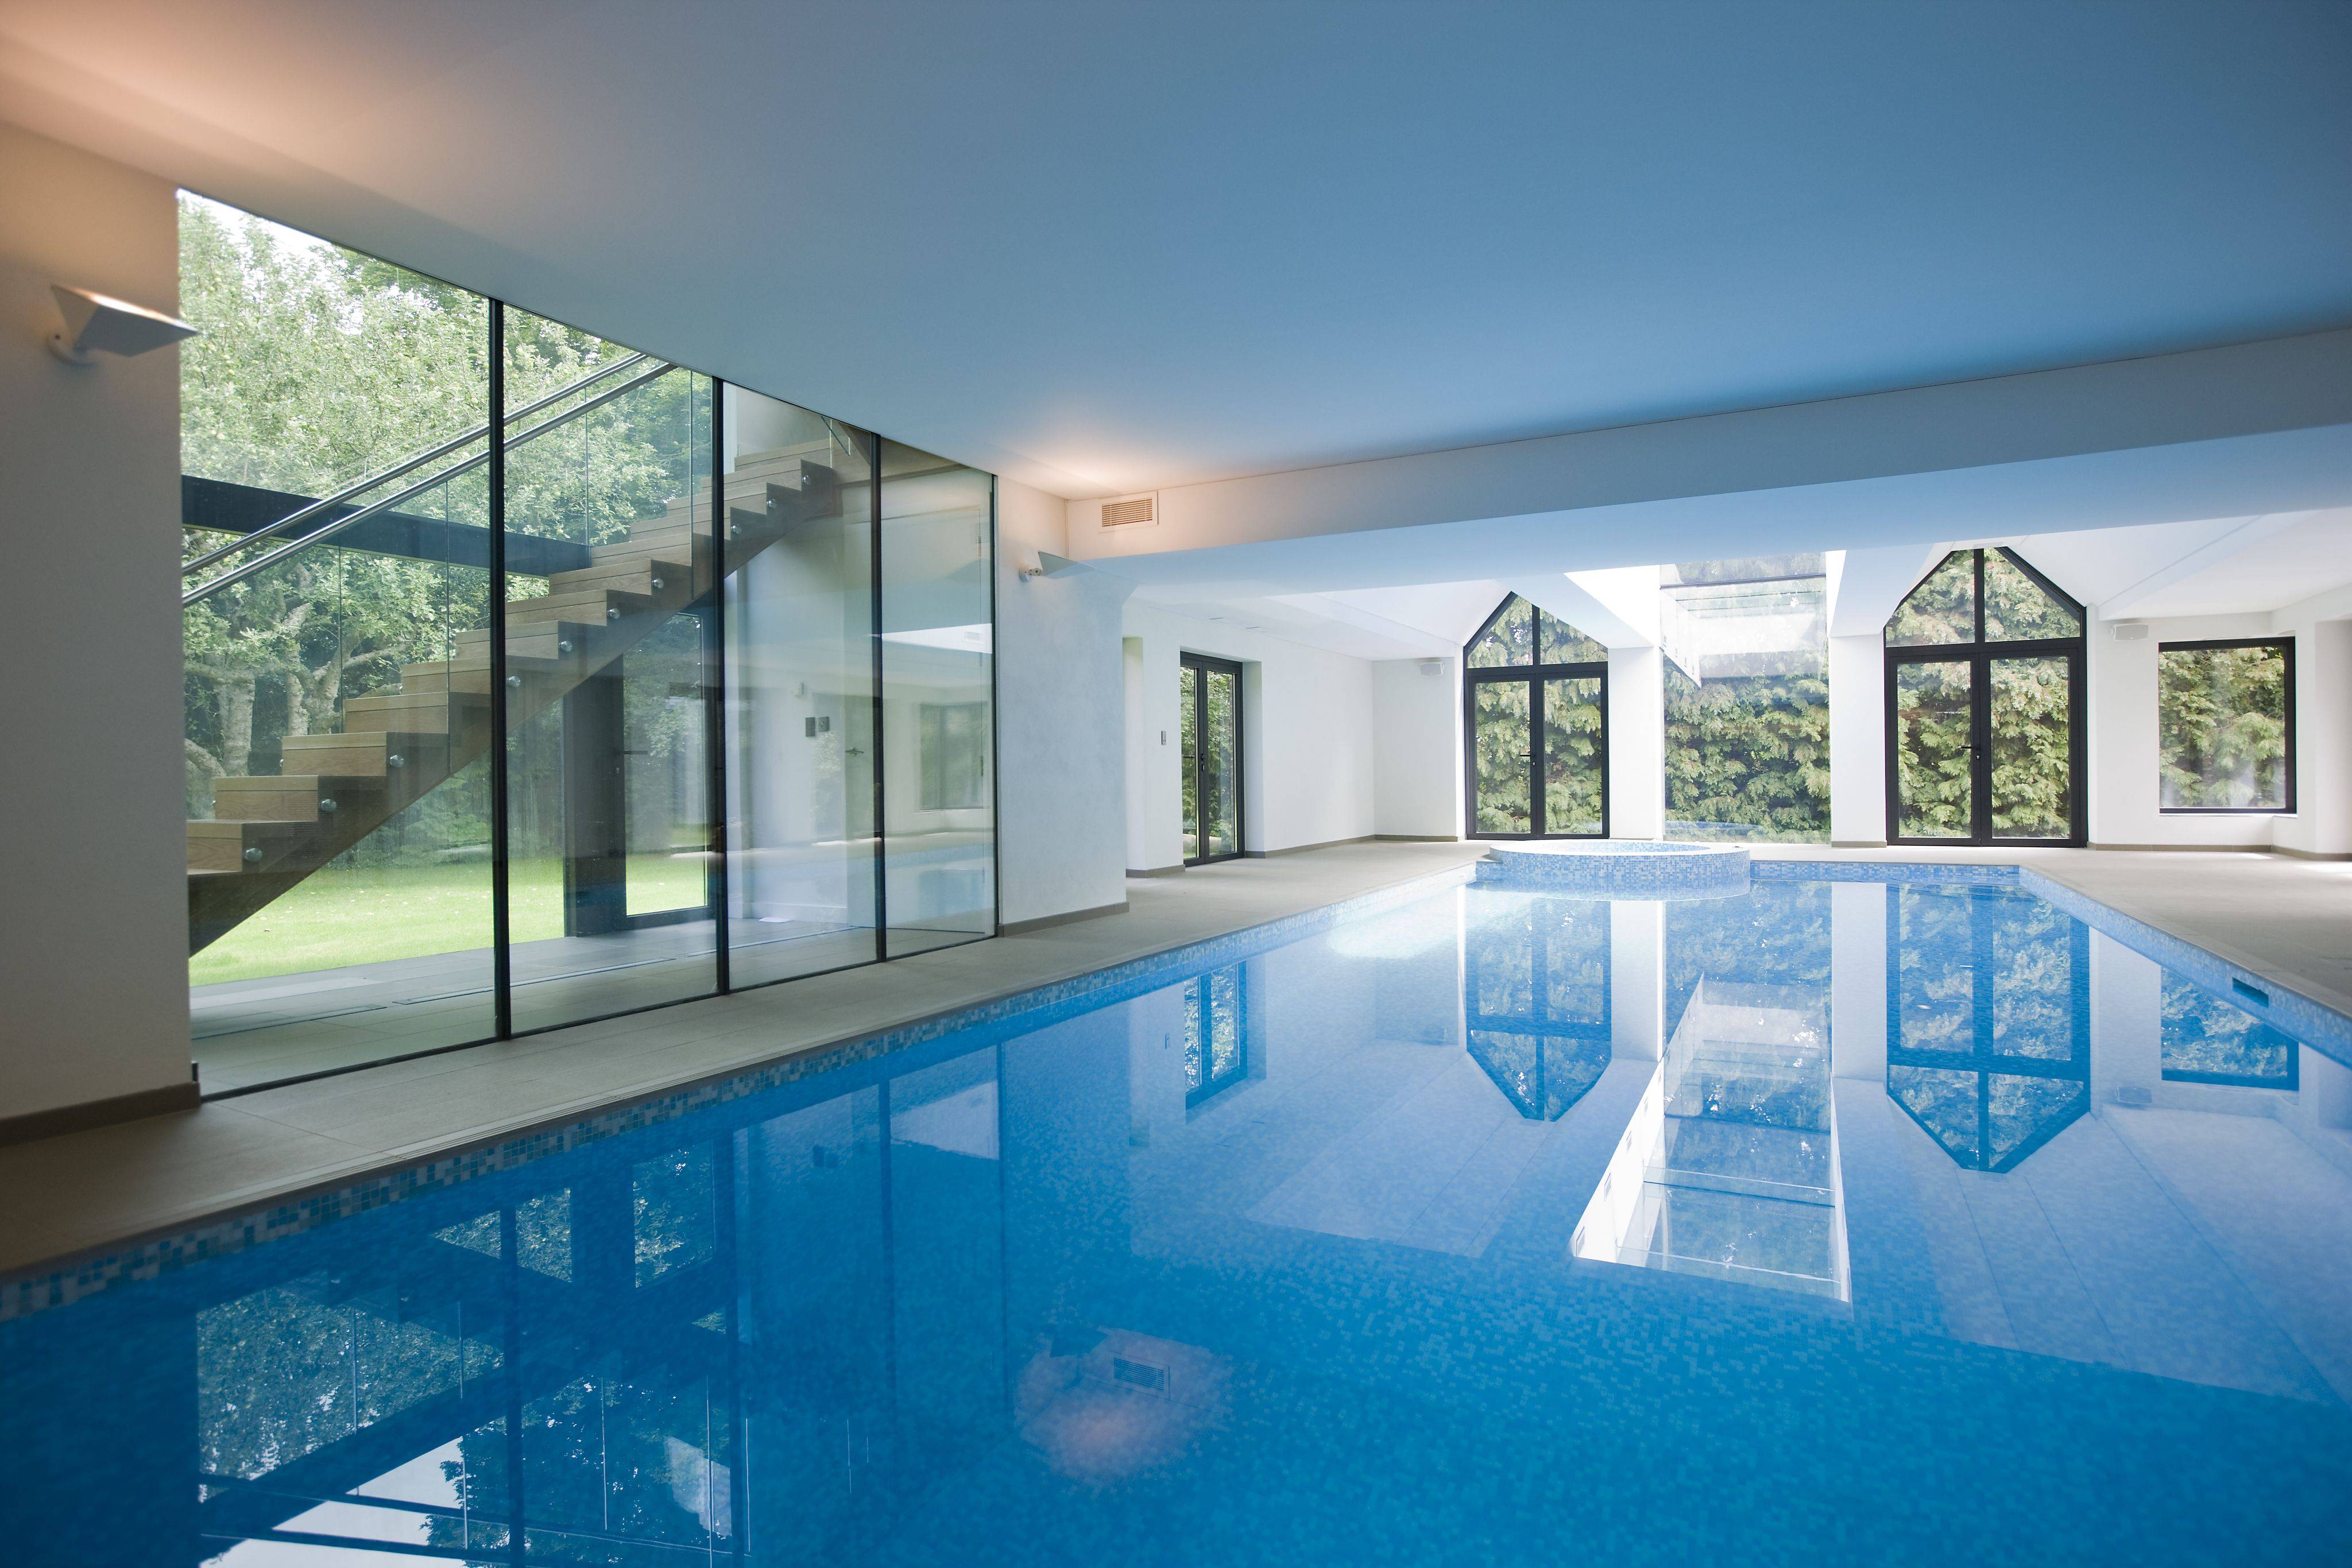 Indoor House Pools Luxury Modern Home Swimming Pool With Structurally Glazed Screens Of Indoor House Pools 